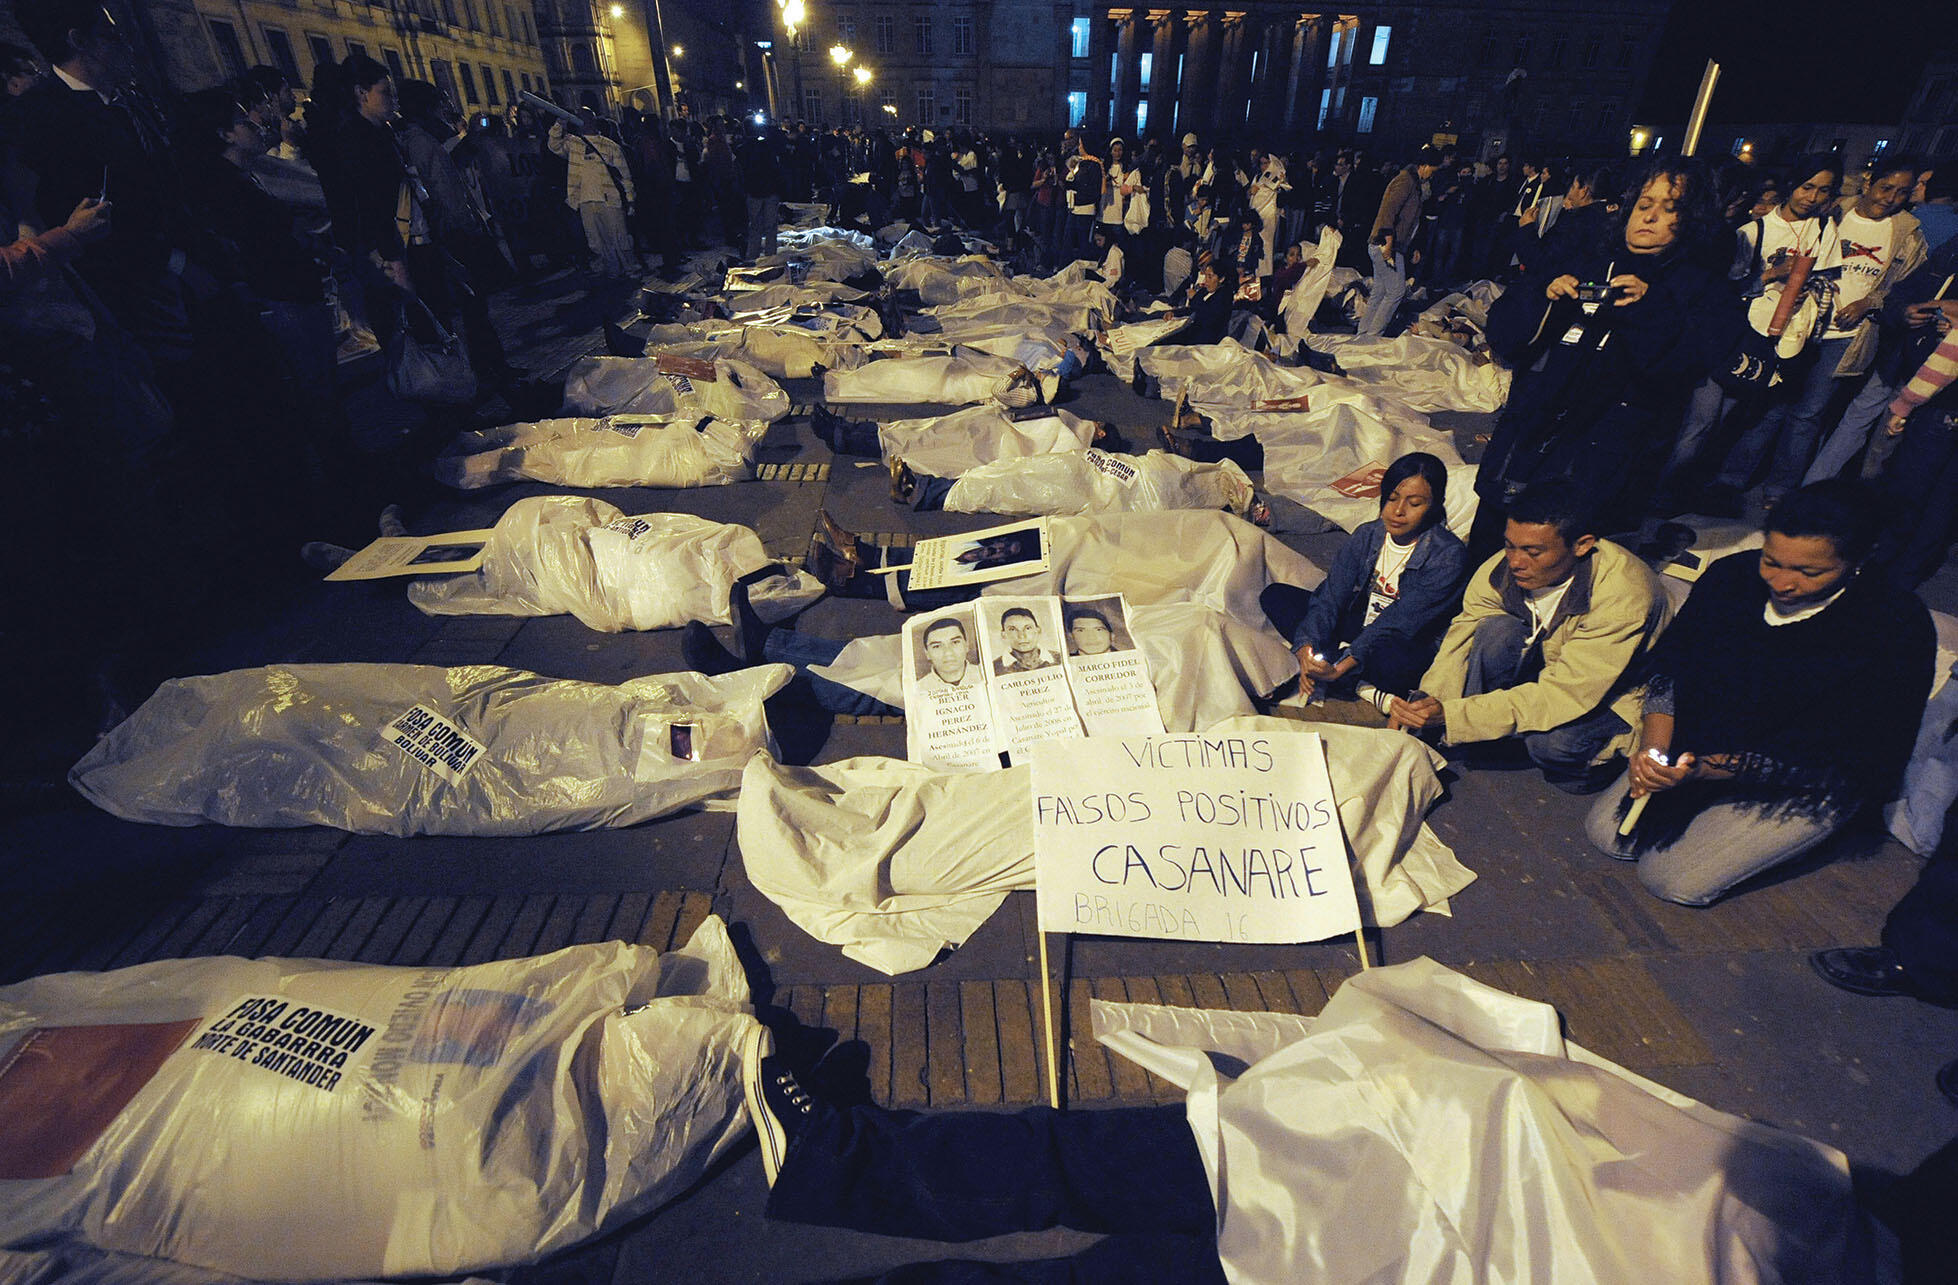 Protestors lie on the ground to pose as the victims in the “falsos positivos” scandal, 2009. (Photo by Mauricio Dueñas/AFP/Getty Images.)